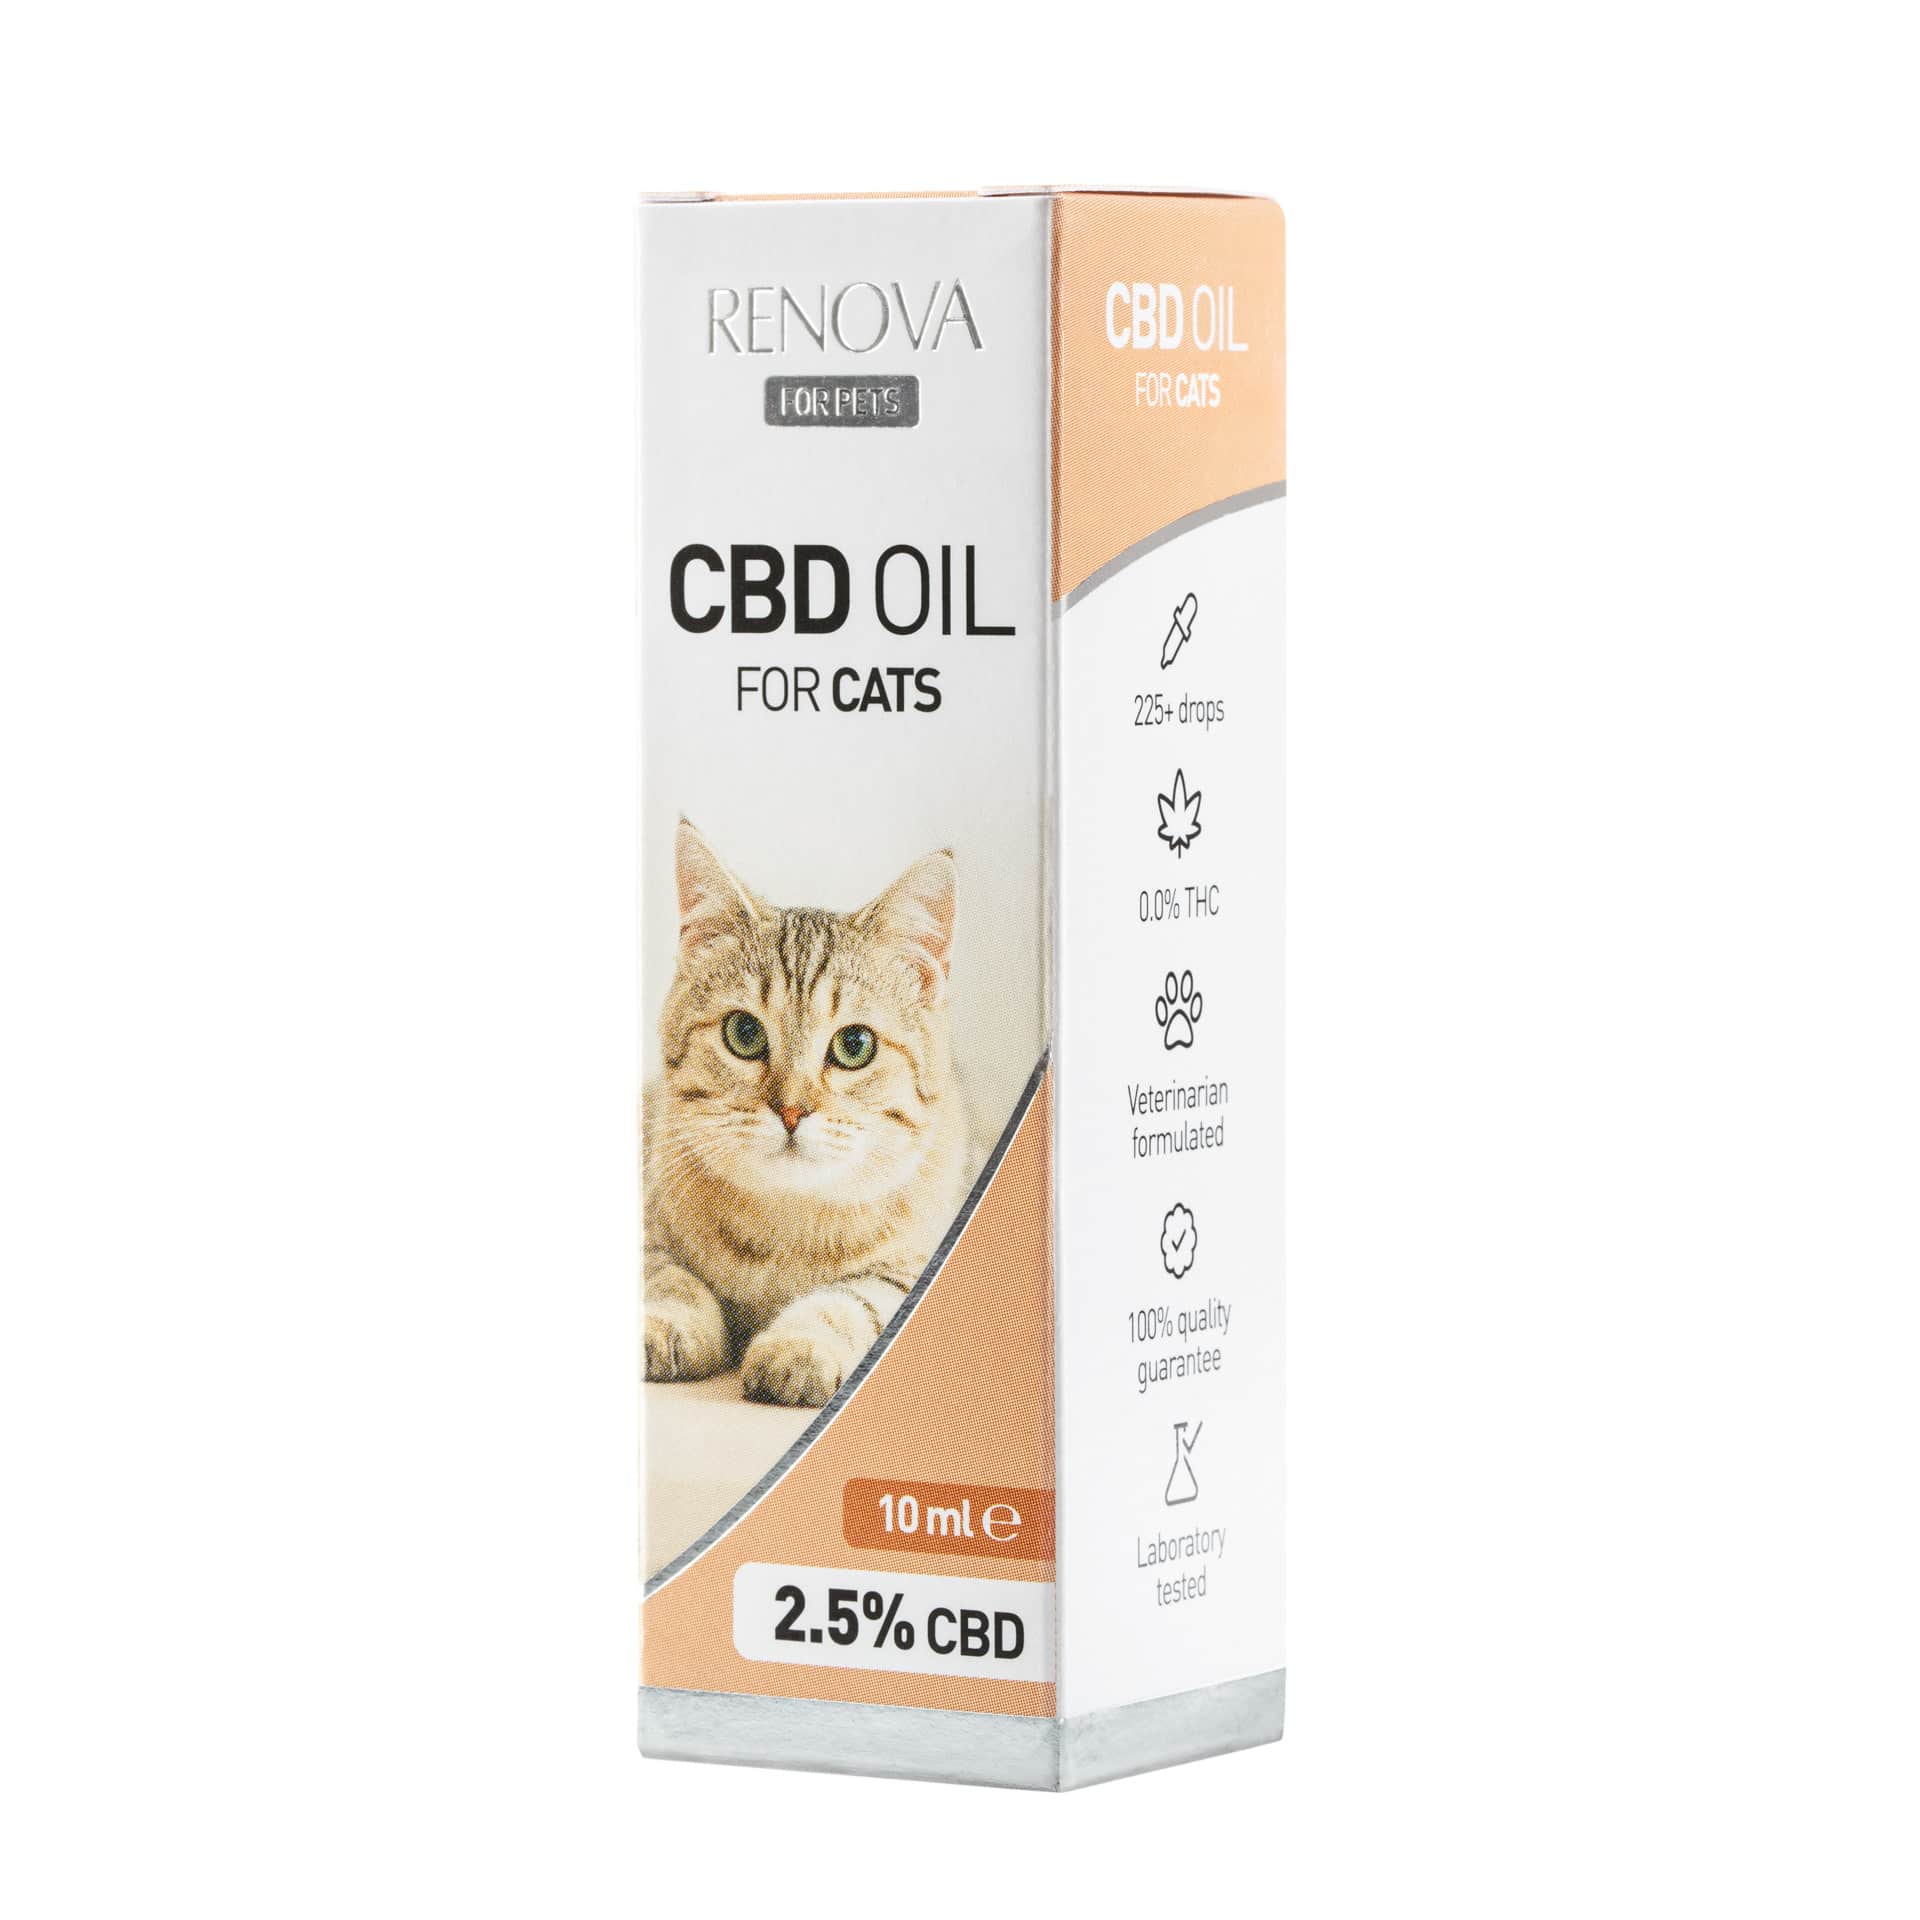 A bottle of Renova CBD oil 2,5% for cats on a white background.